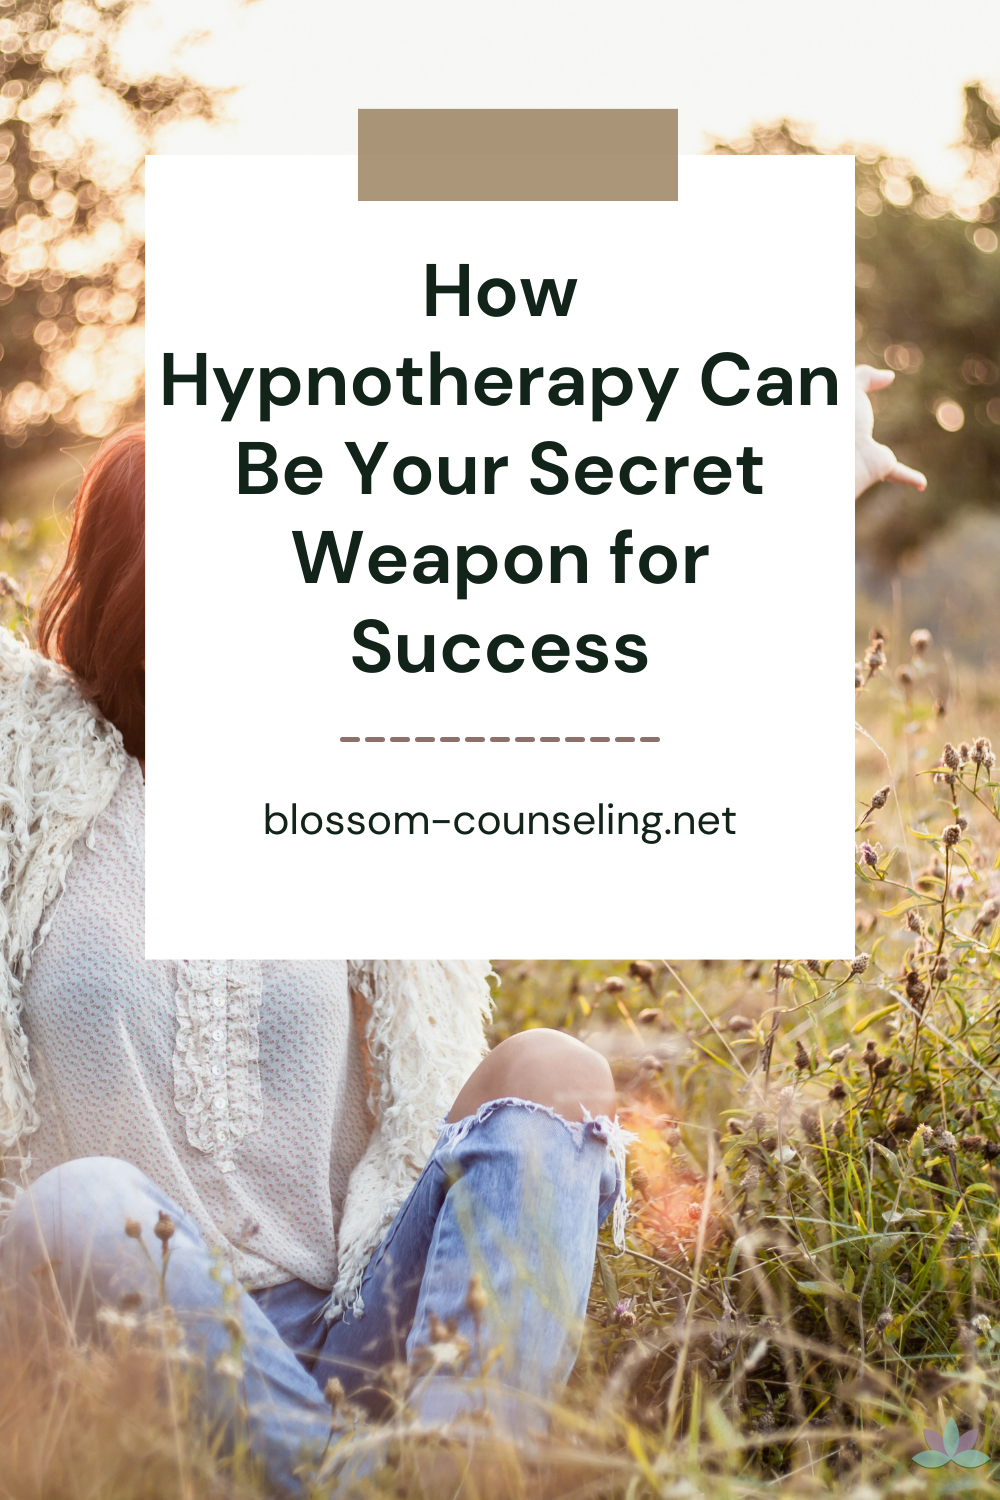 How Hypnotherapy Can Be Your Secret Weapon for Success